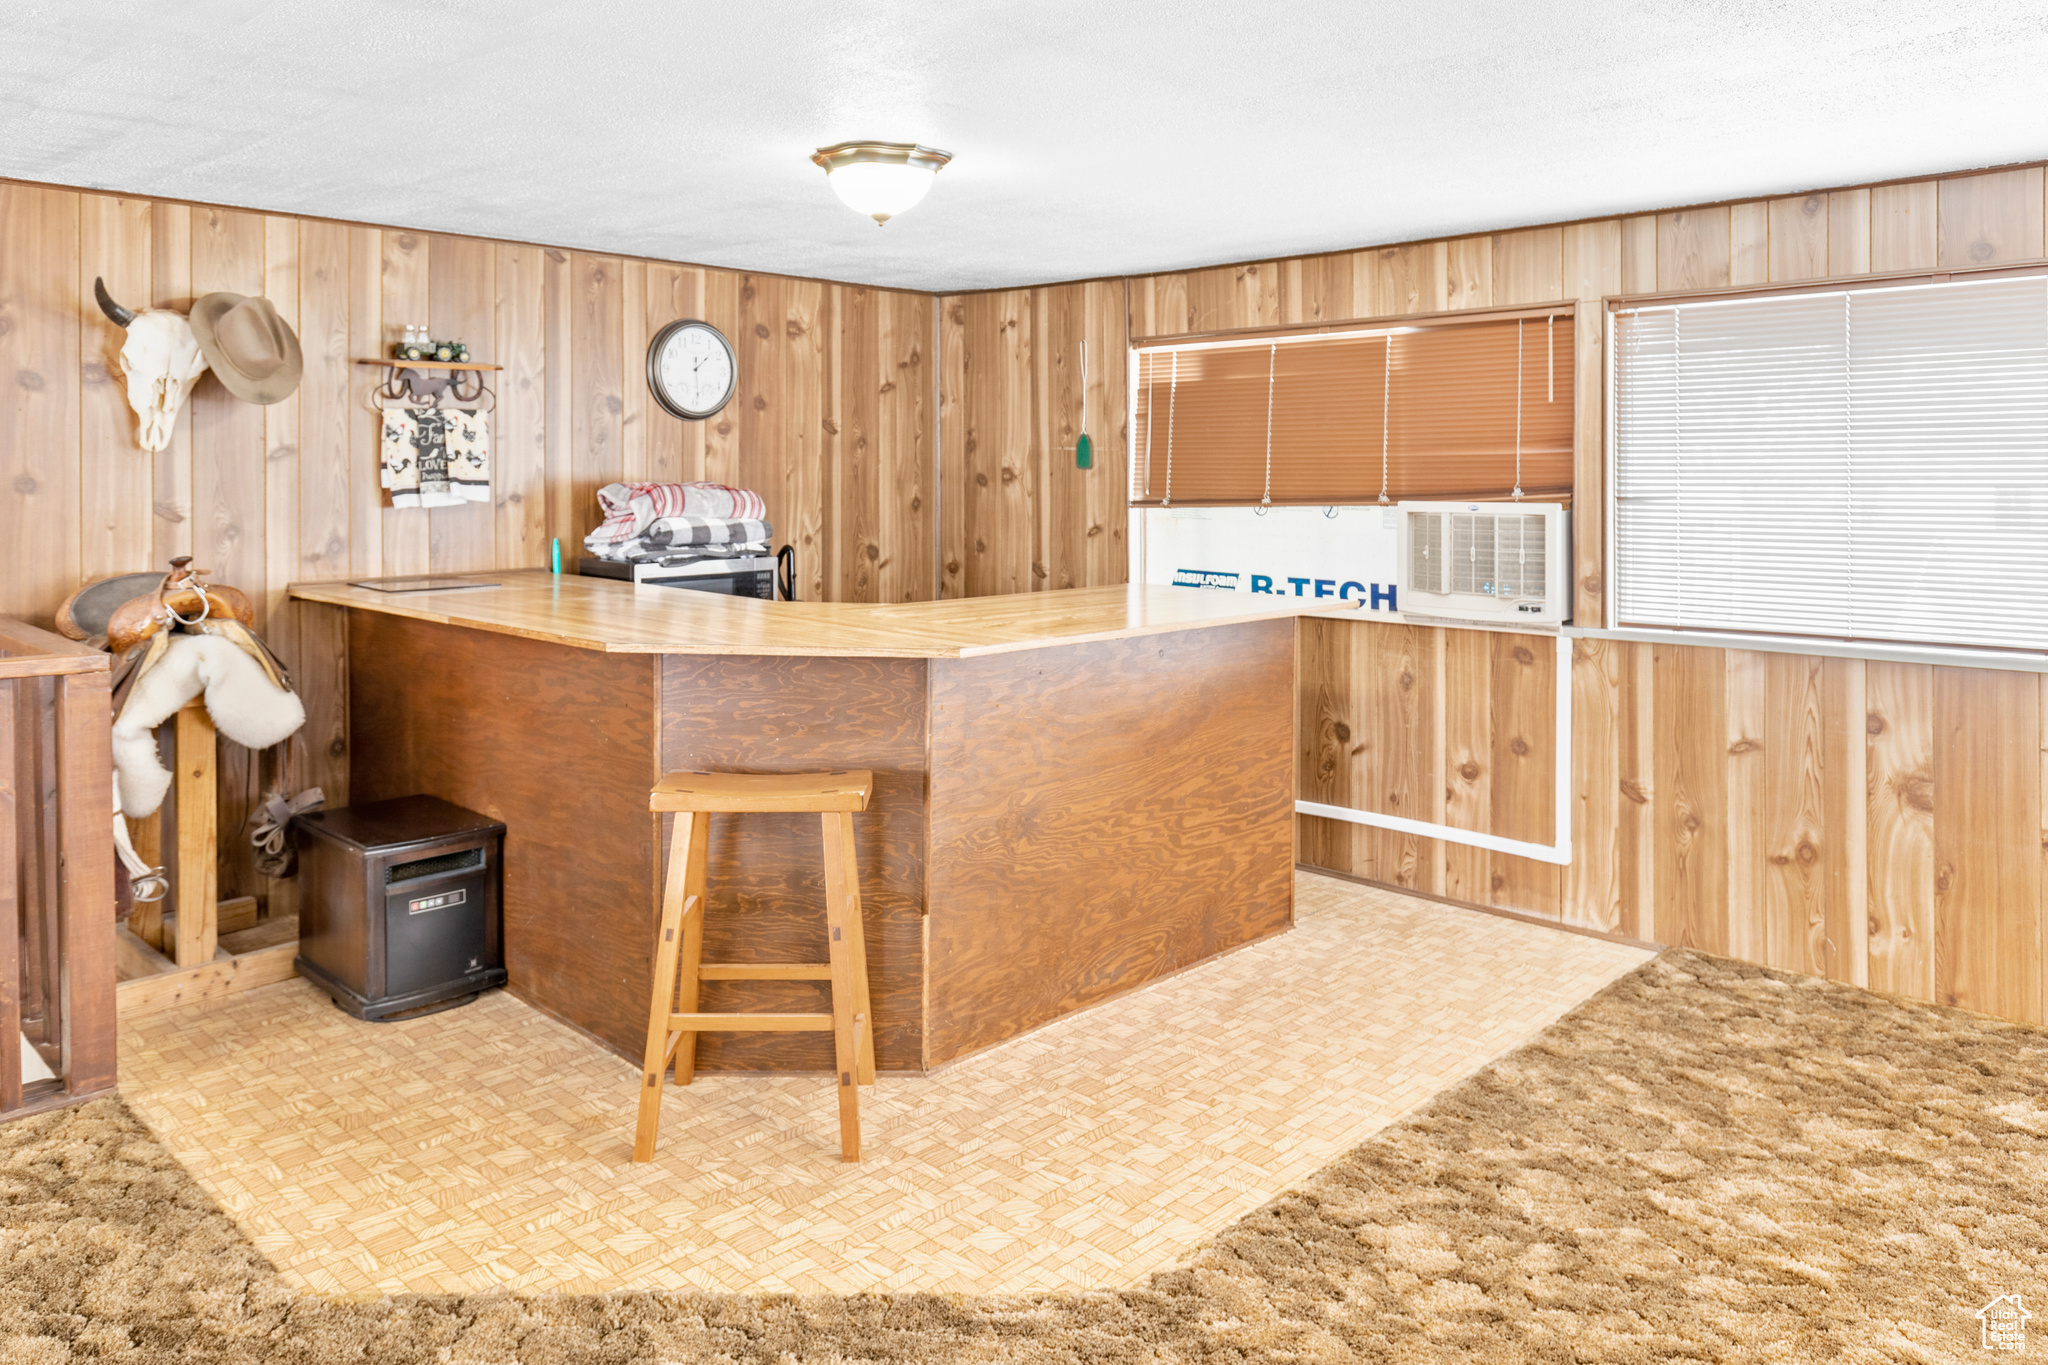 Kitchen with light colored carpet, a kitchen bar, kitchen peninsula, and wooden walls